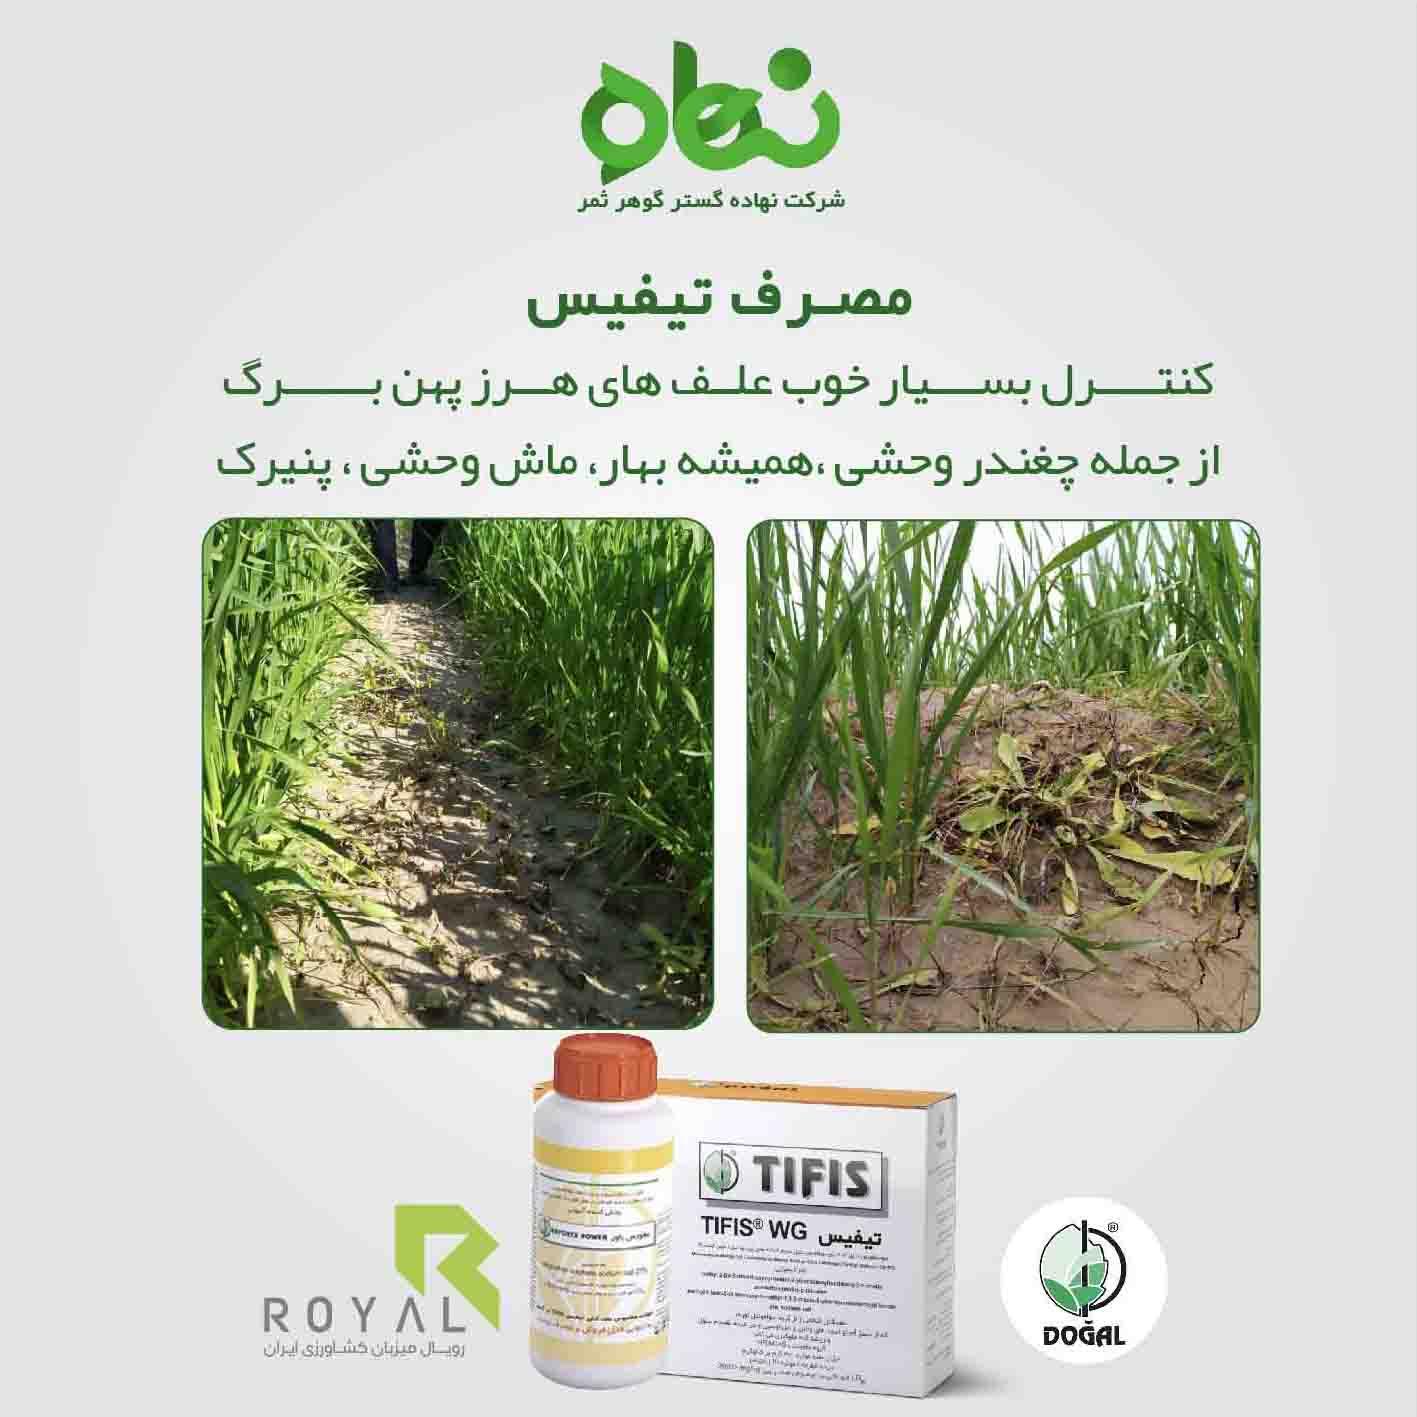 Weed control by Tifis herbicide